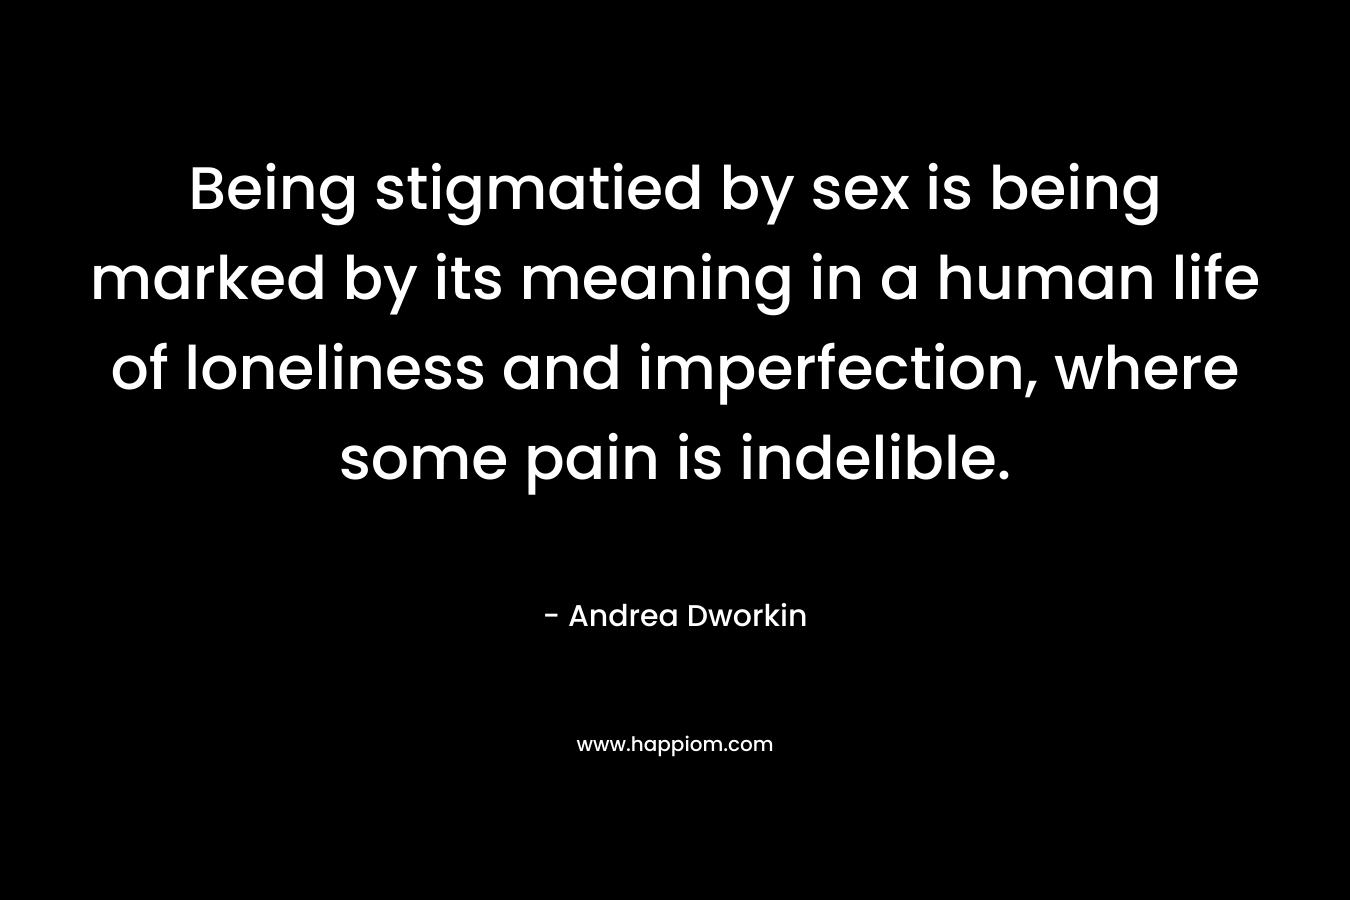 Being stigmatied by sex is being marked by its meaning in a human life of loneliness and imperfection, where some pain is indelible. – Andrea Dworkin